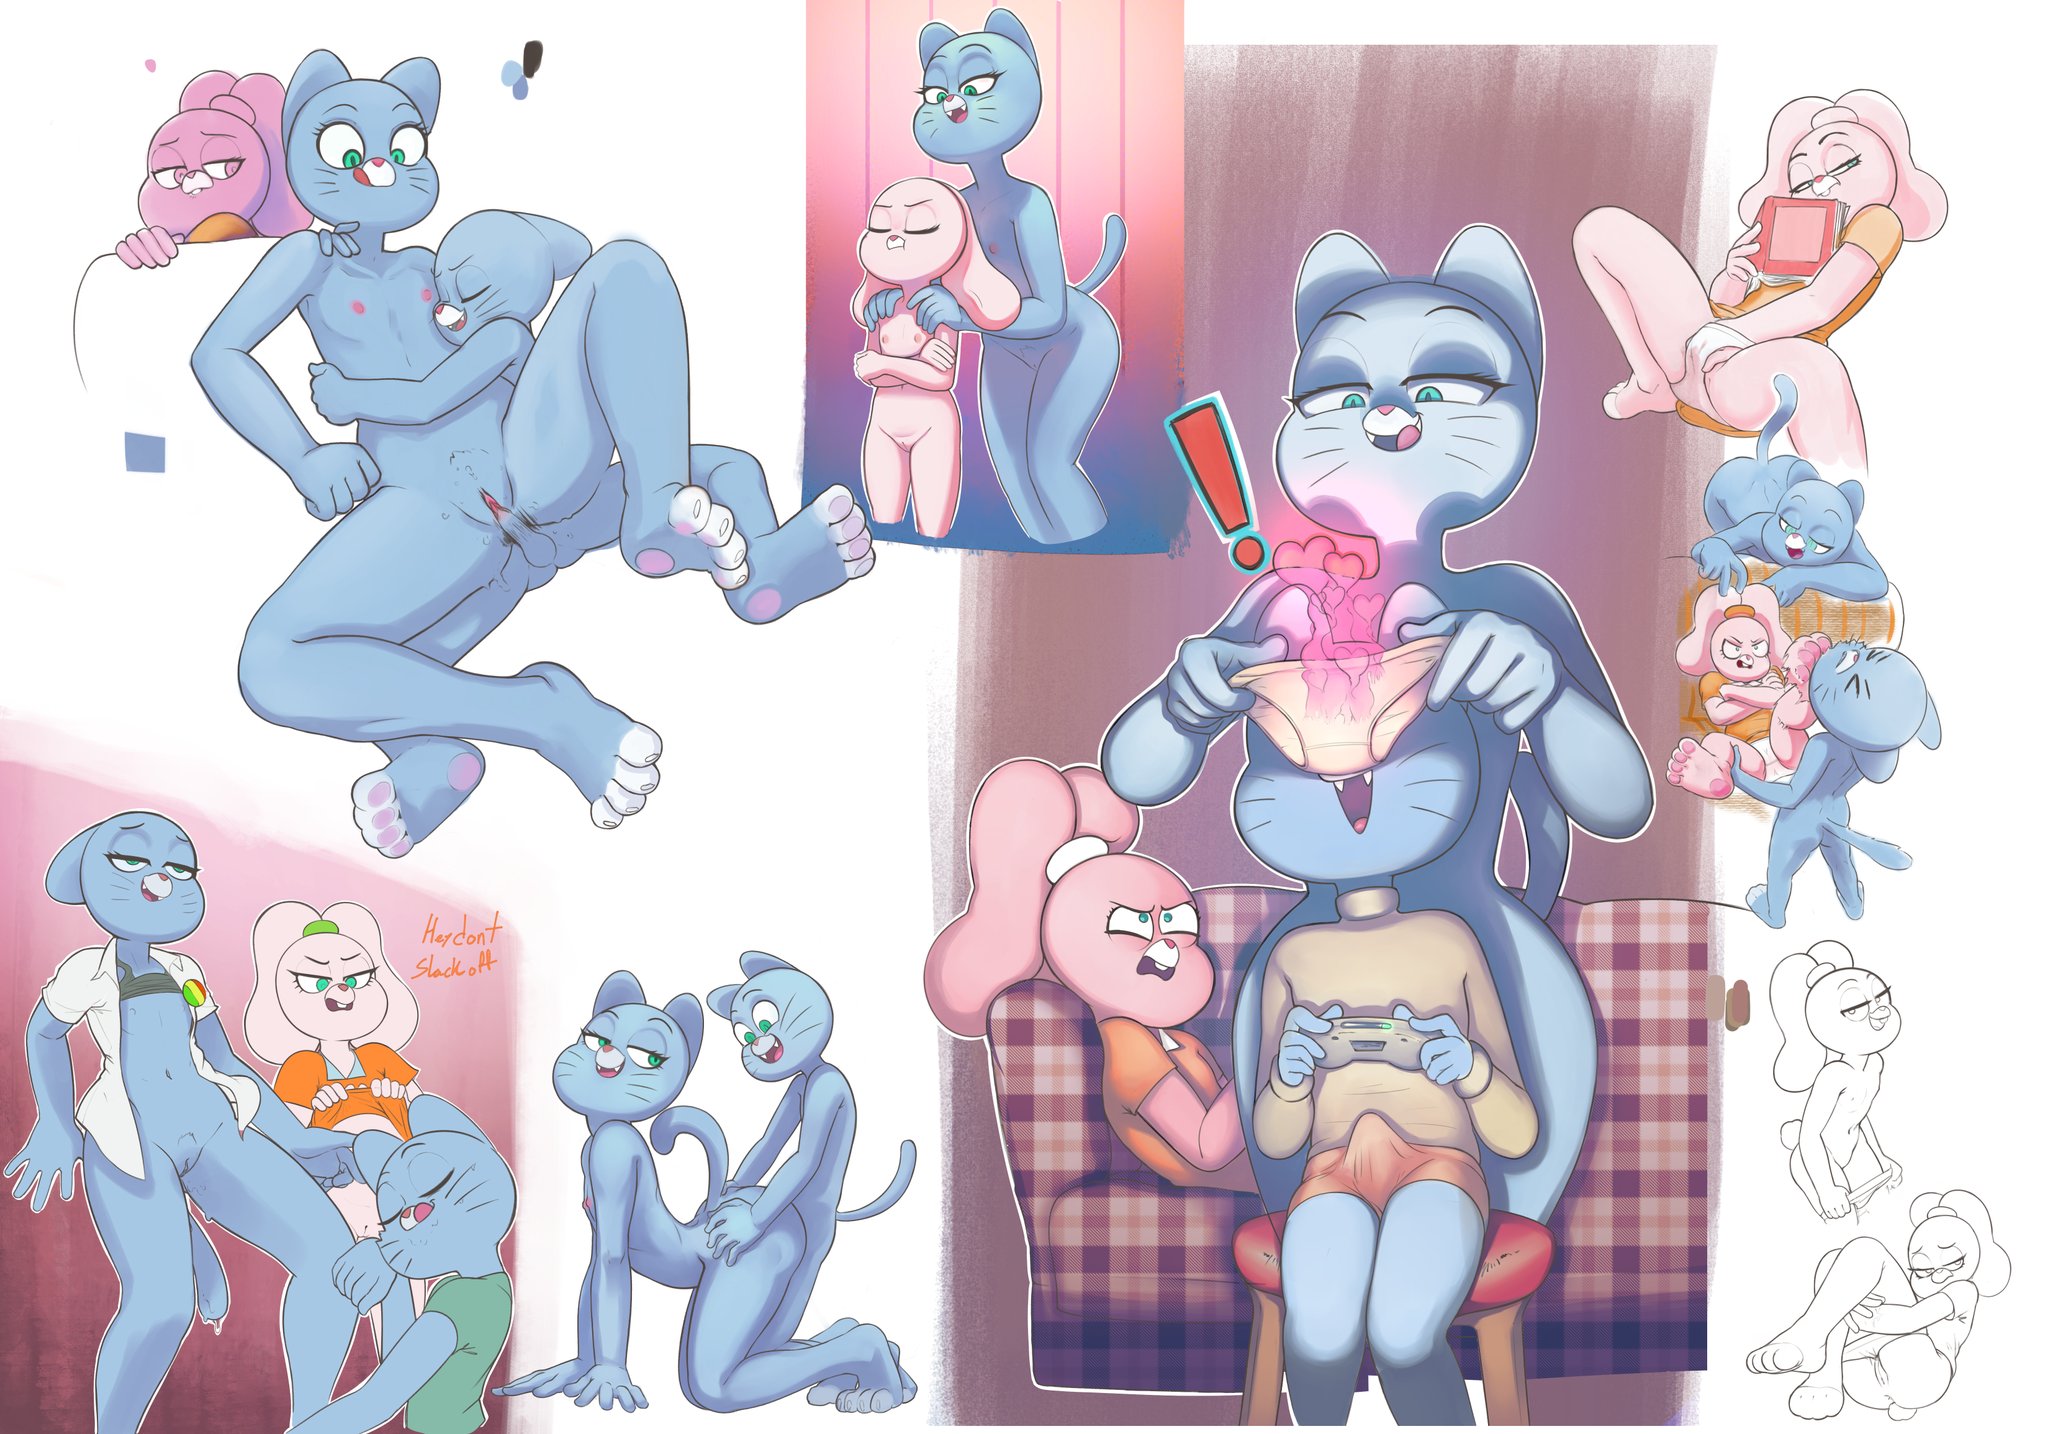 “Anais is like wtf mom and gumball but we all know she actually likes it do...